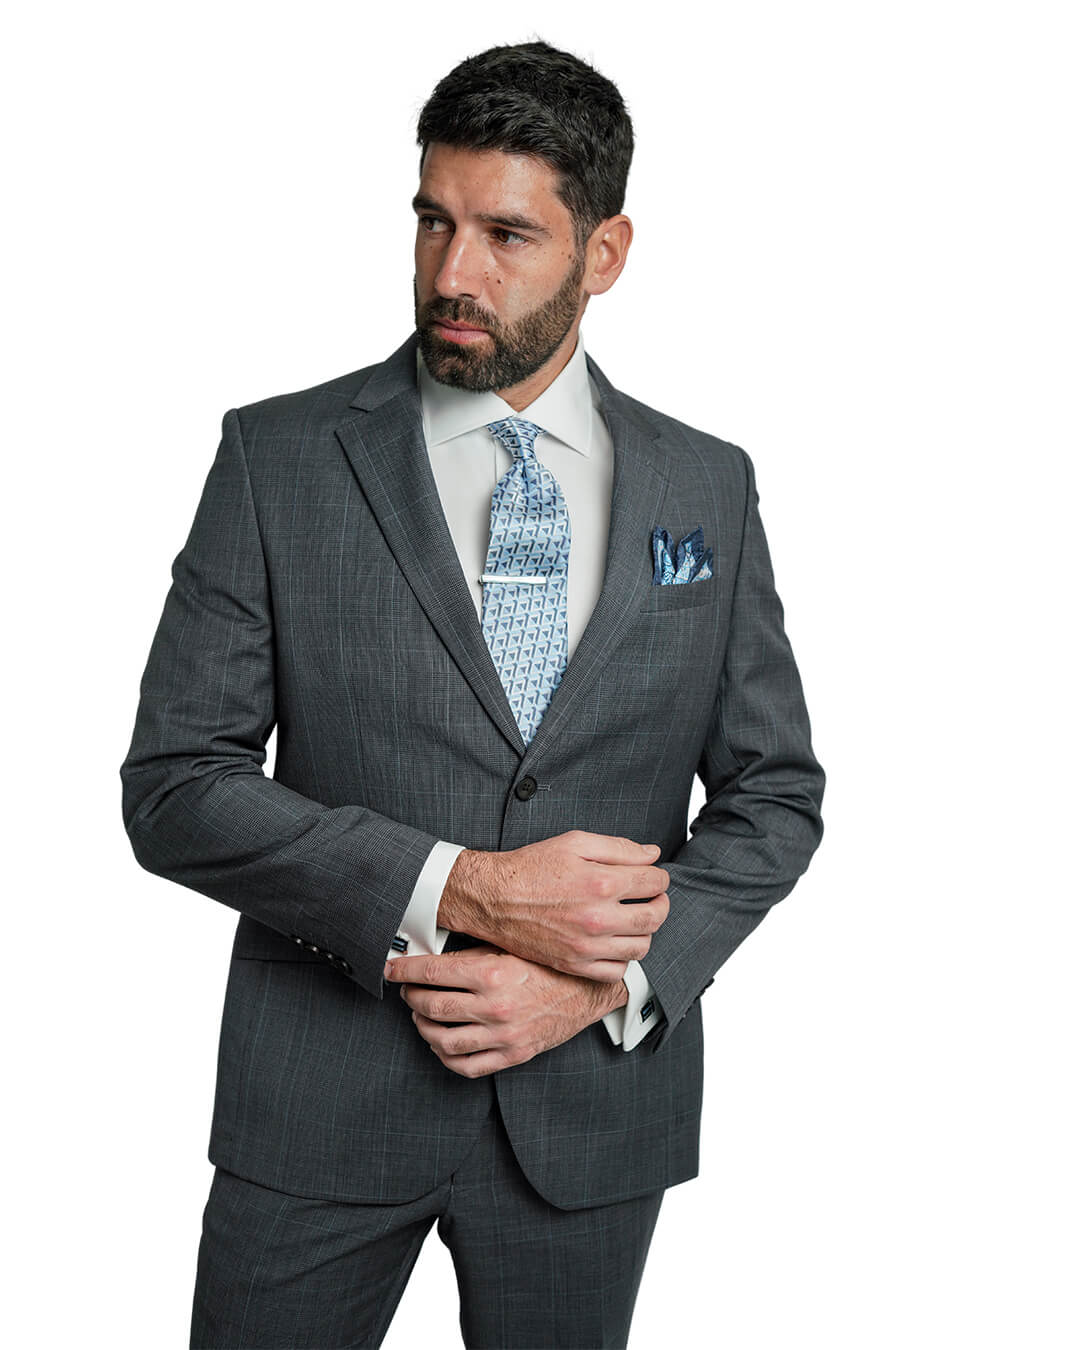 Grey Prince of Wales Check Suit